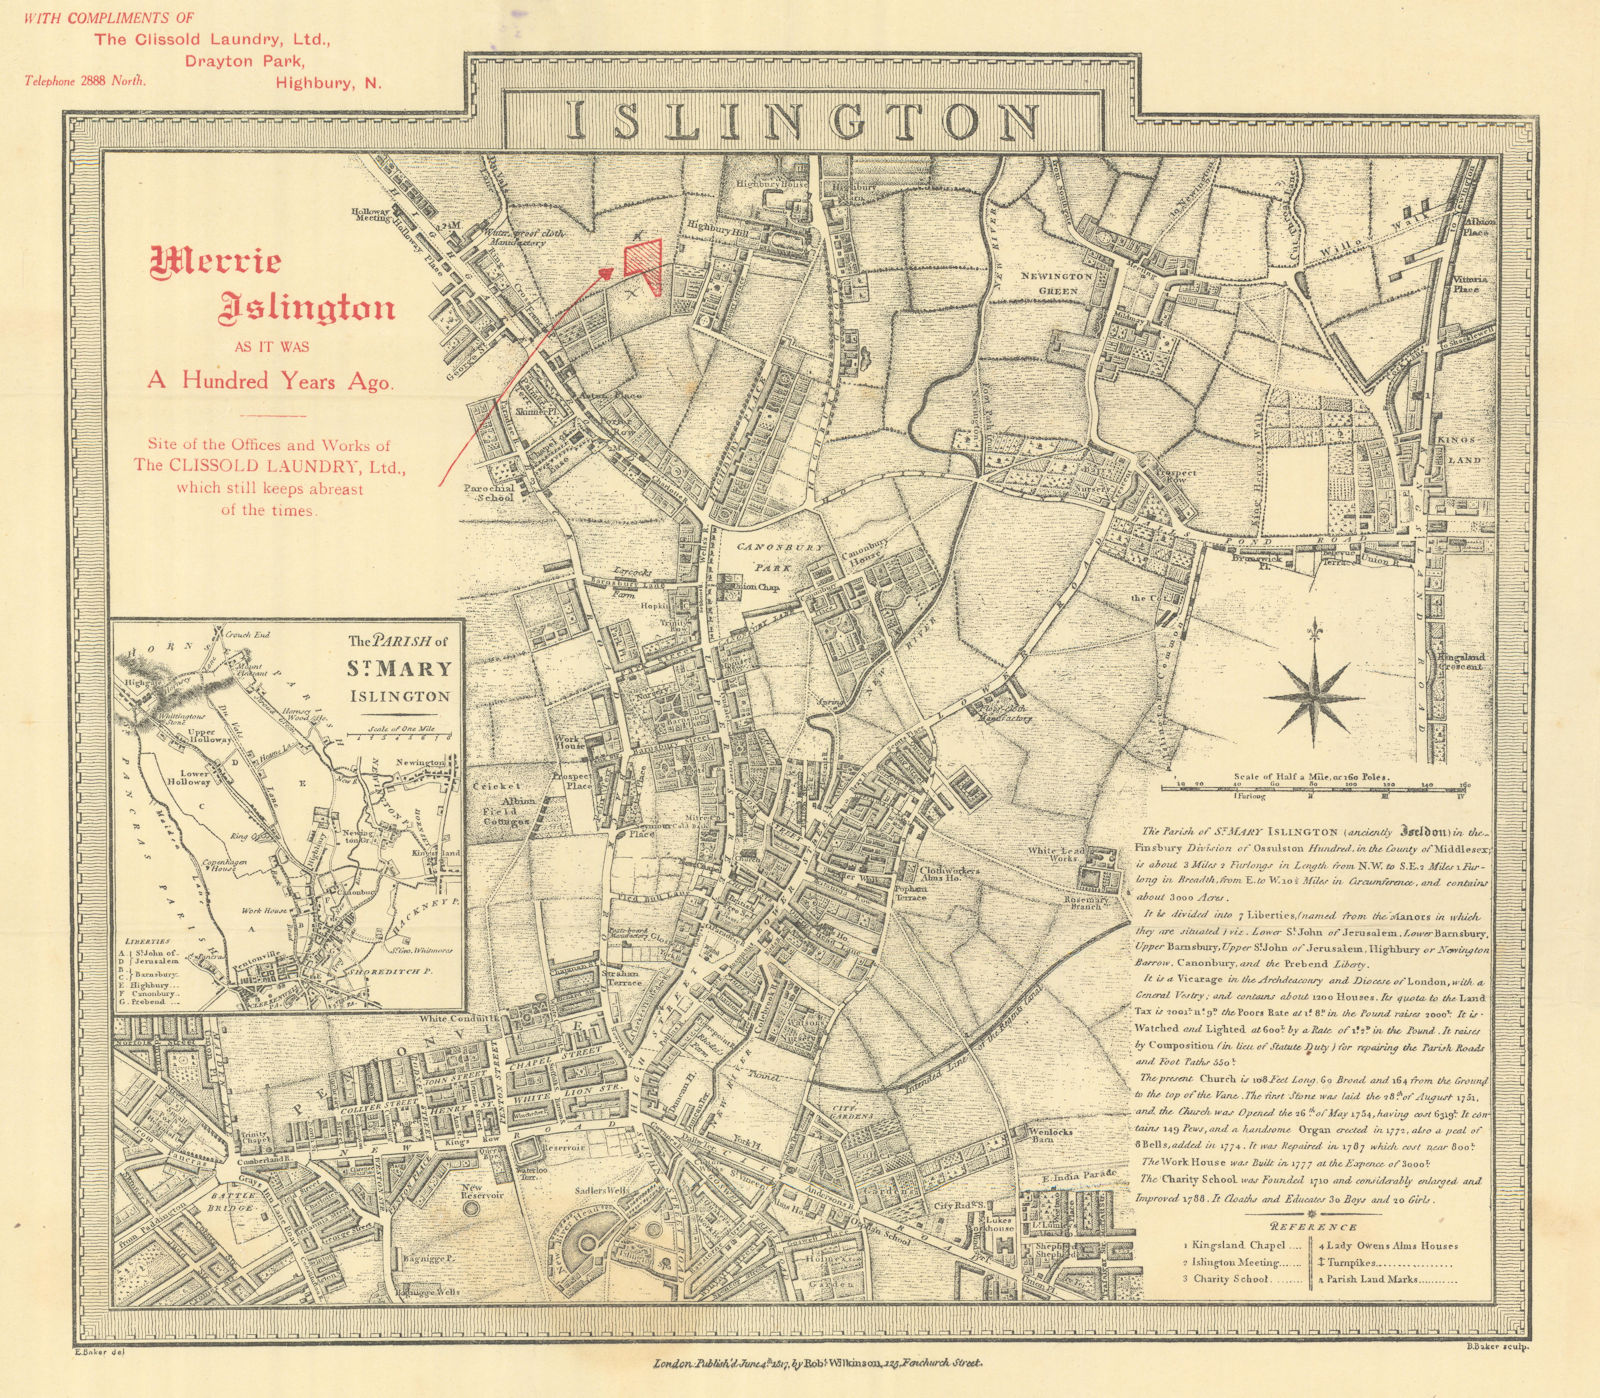 Merrie Islington as it was A Hundred Years Ago. BENJAMIN BAKER 1817 (1917) map